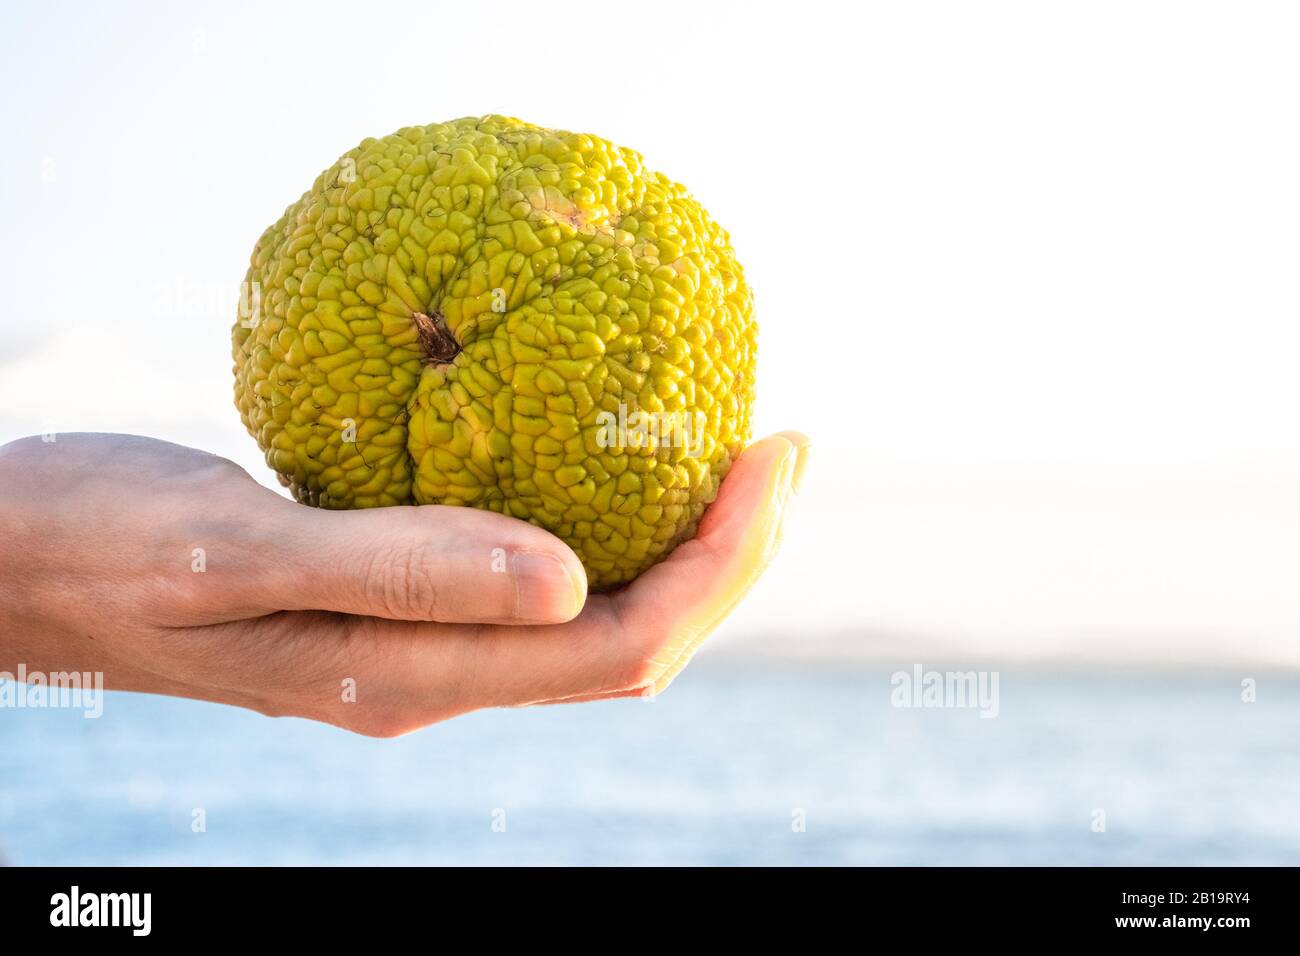 Female hand holding a Maclura pomifera, commonly known as the Osage orange, hedge, or hedge apple. Stock Photo